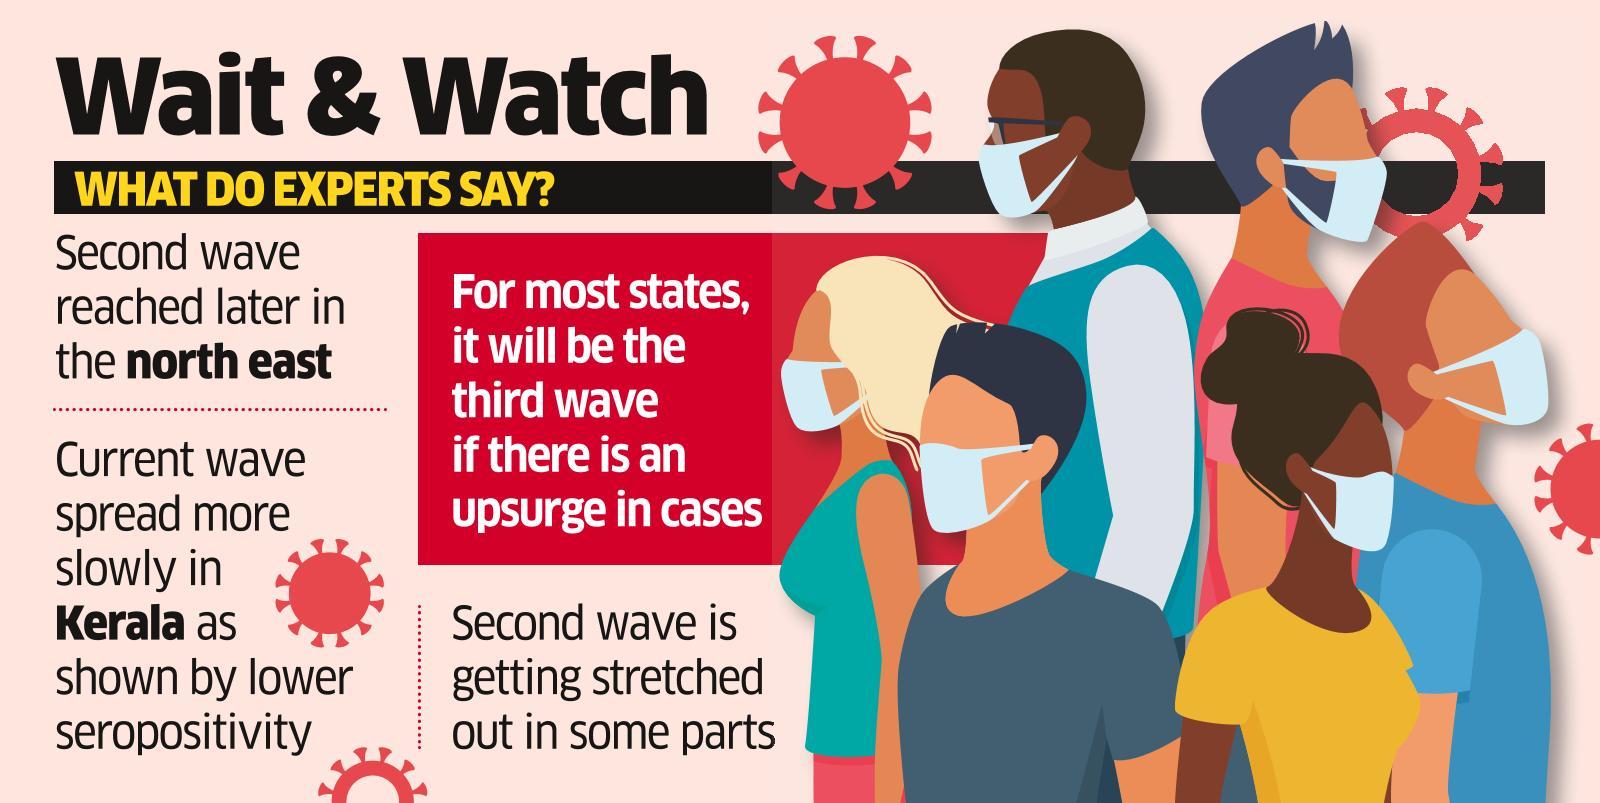 covid third wave: No third wave yet, surge in cases continuation of the second one, say experts - The Economic Times